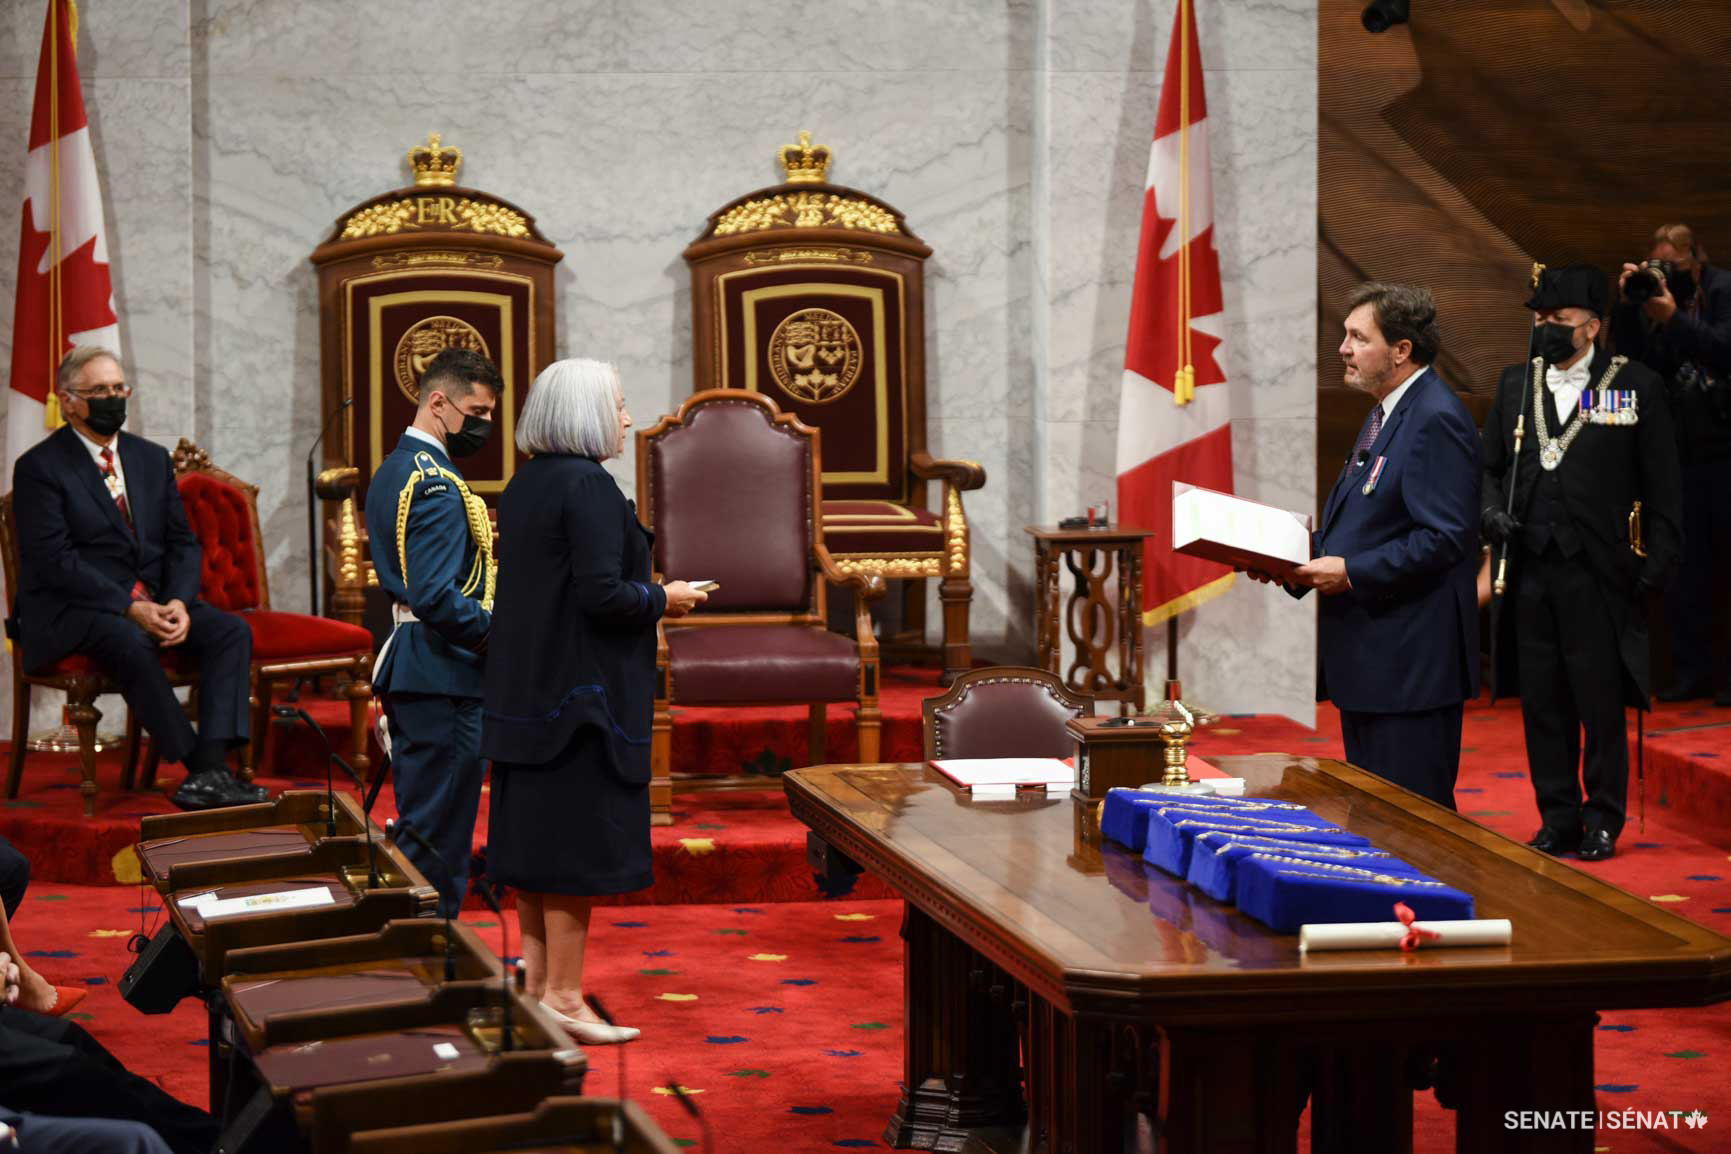 Chief Justice of Canada the Right Honourable Richard Wagner administers the oaths of office for Governor General Mary Simon.